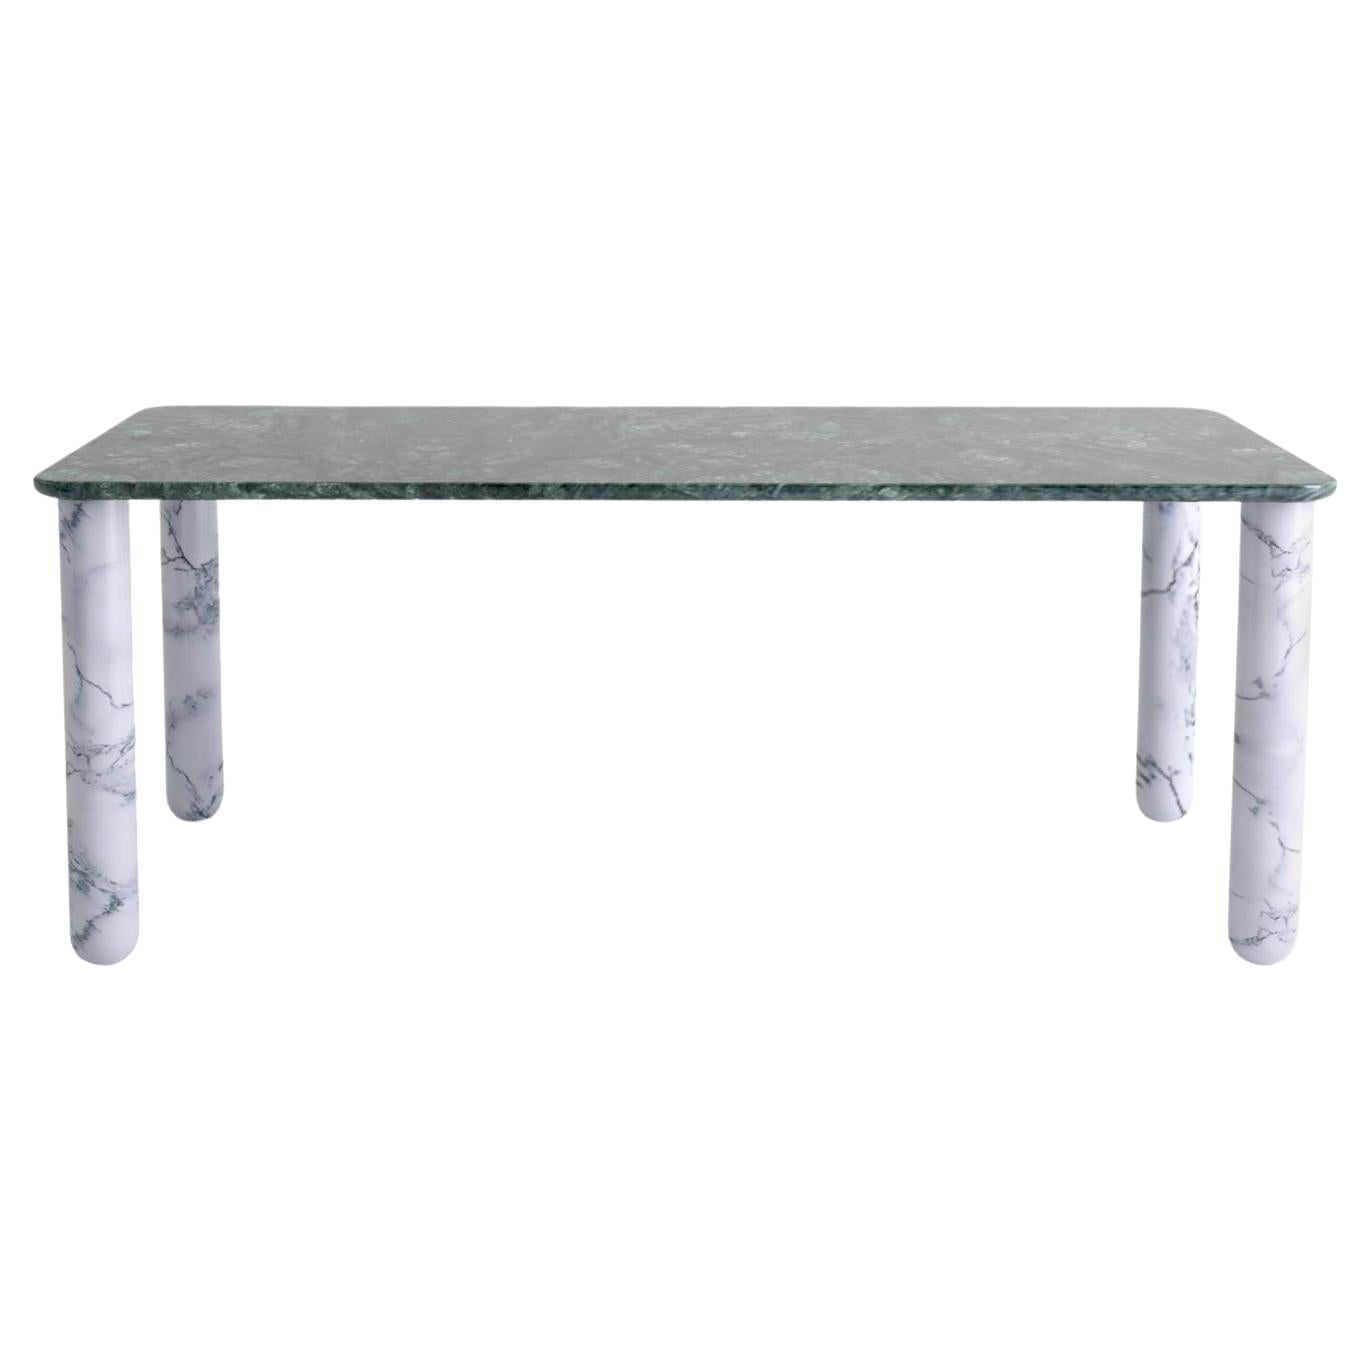 Green and White Marble "Sunday" Dining Table, Jean-Baptiste Souletie For Sale